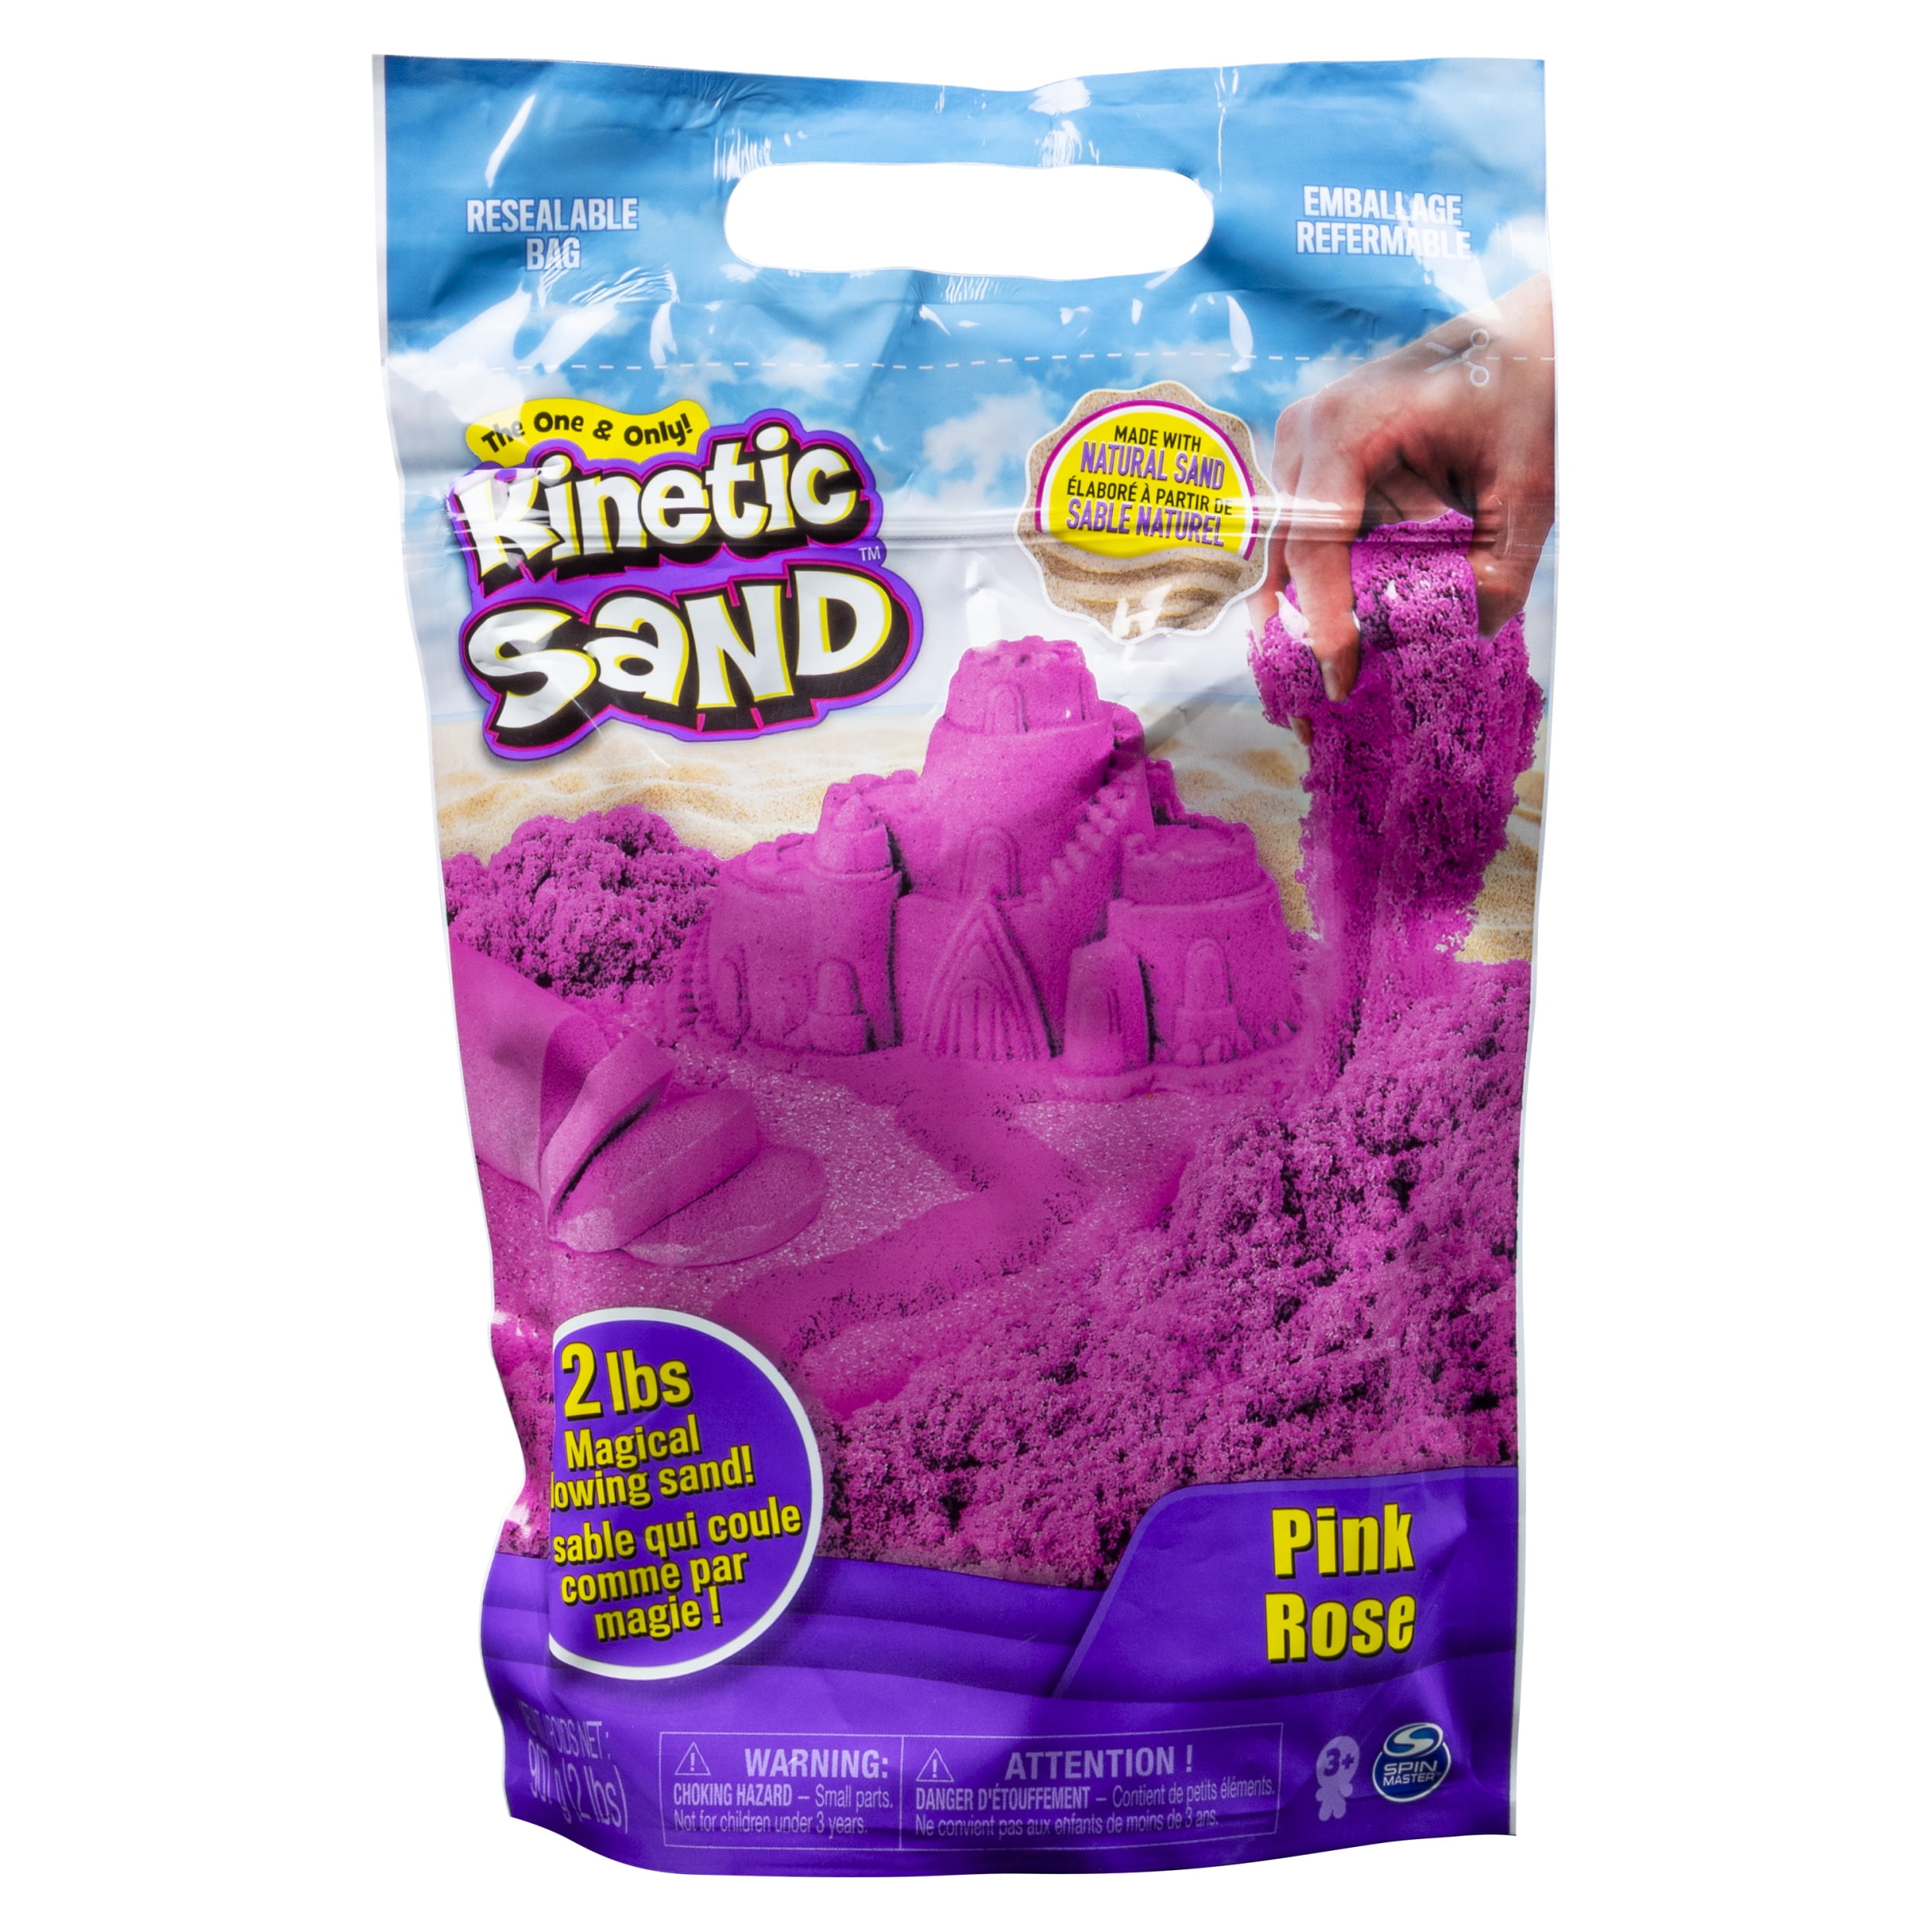 best place to buy kinetic sand